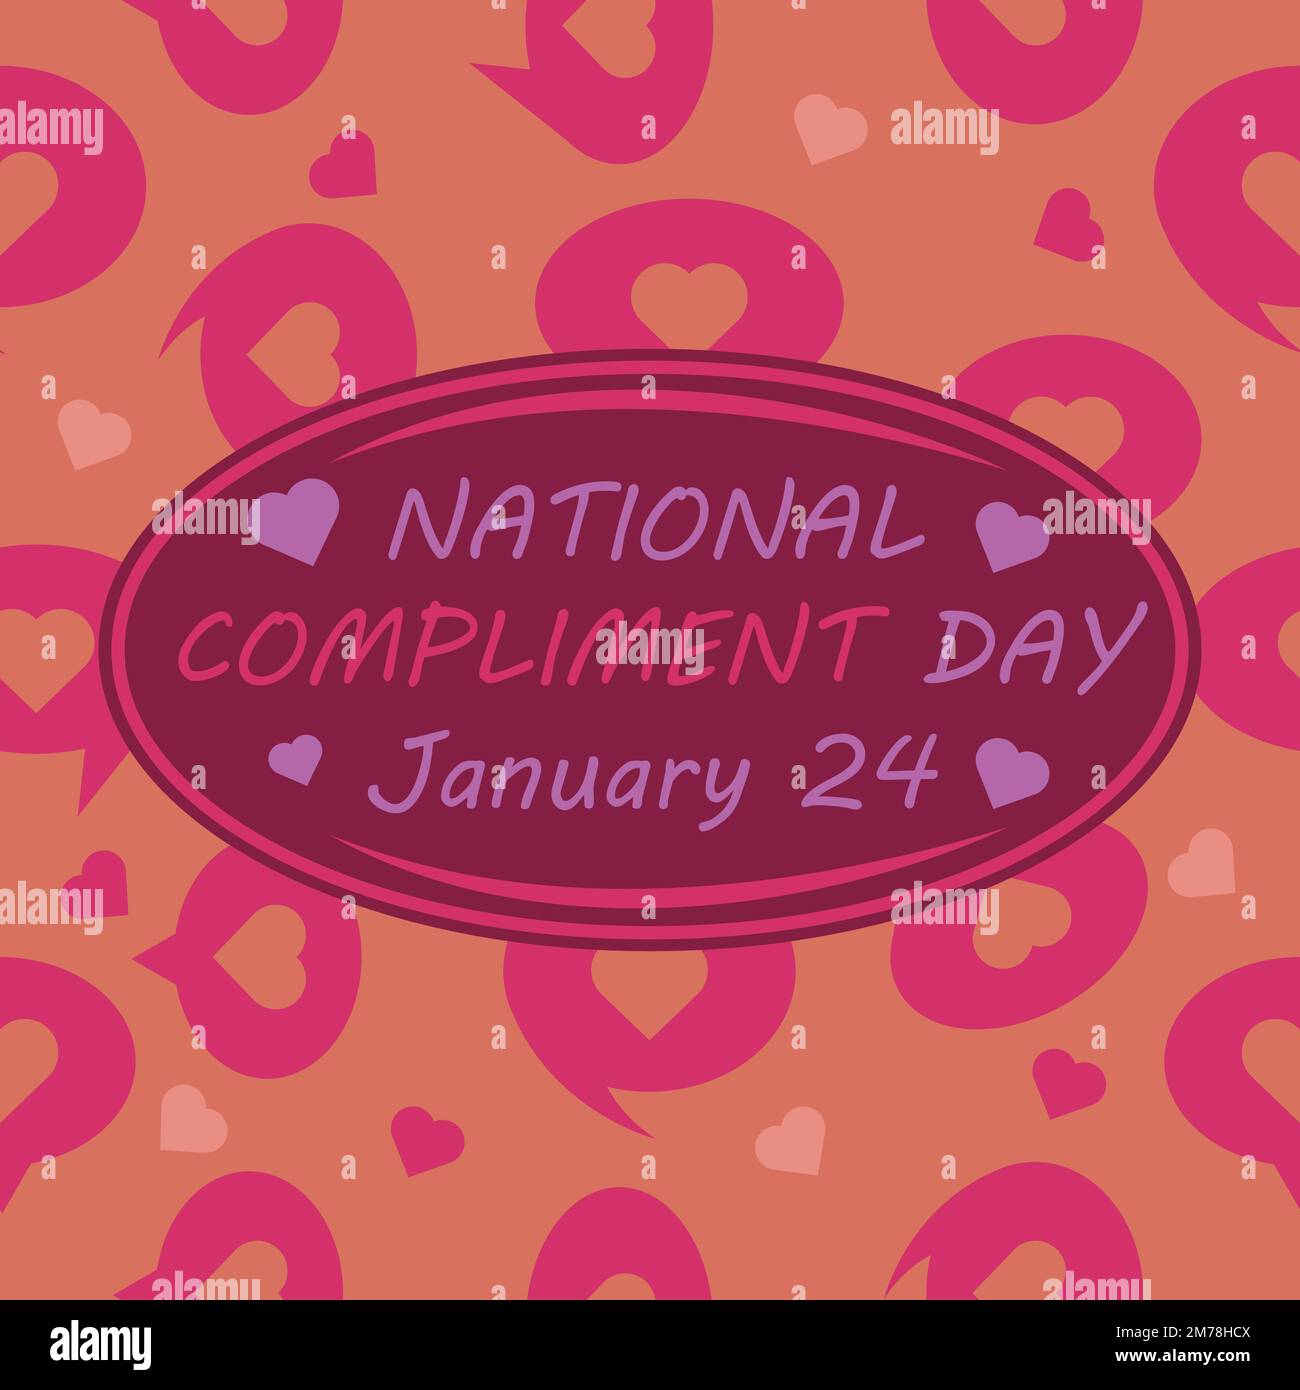 Vector banner design celebrating National complement day every january 24 with colorful and abstract background. National complement day poster design Stock Vector